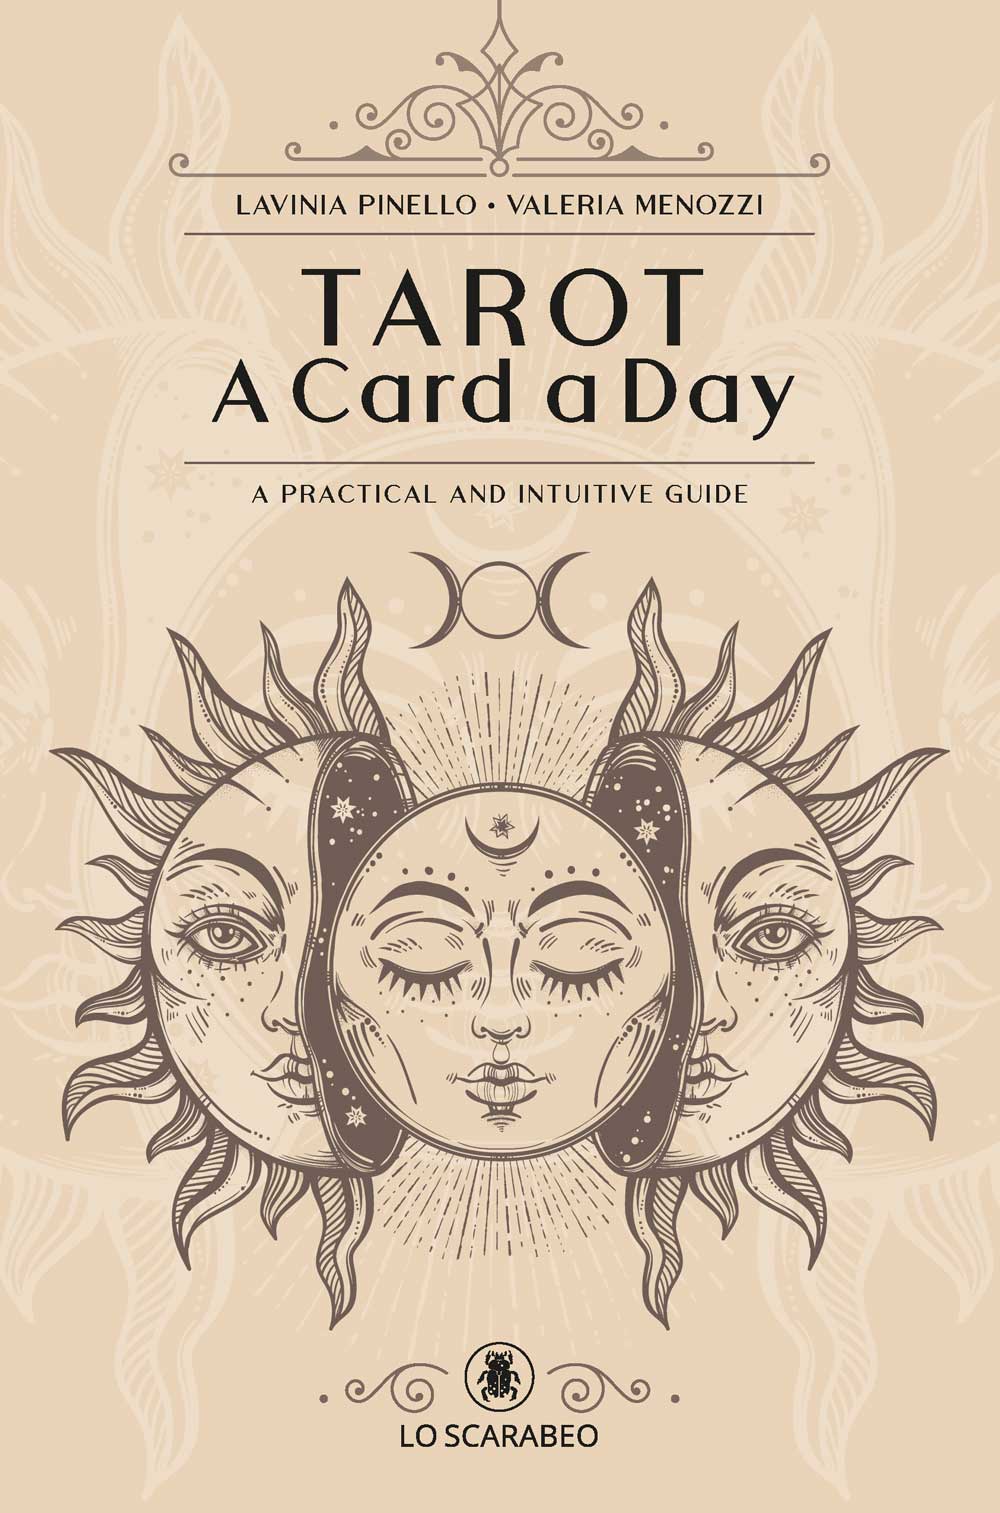 Tarot - The Card of the Day